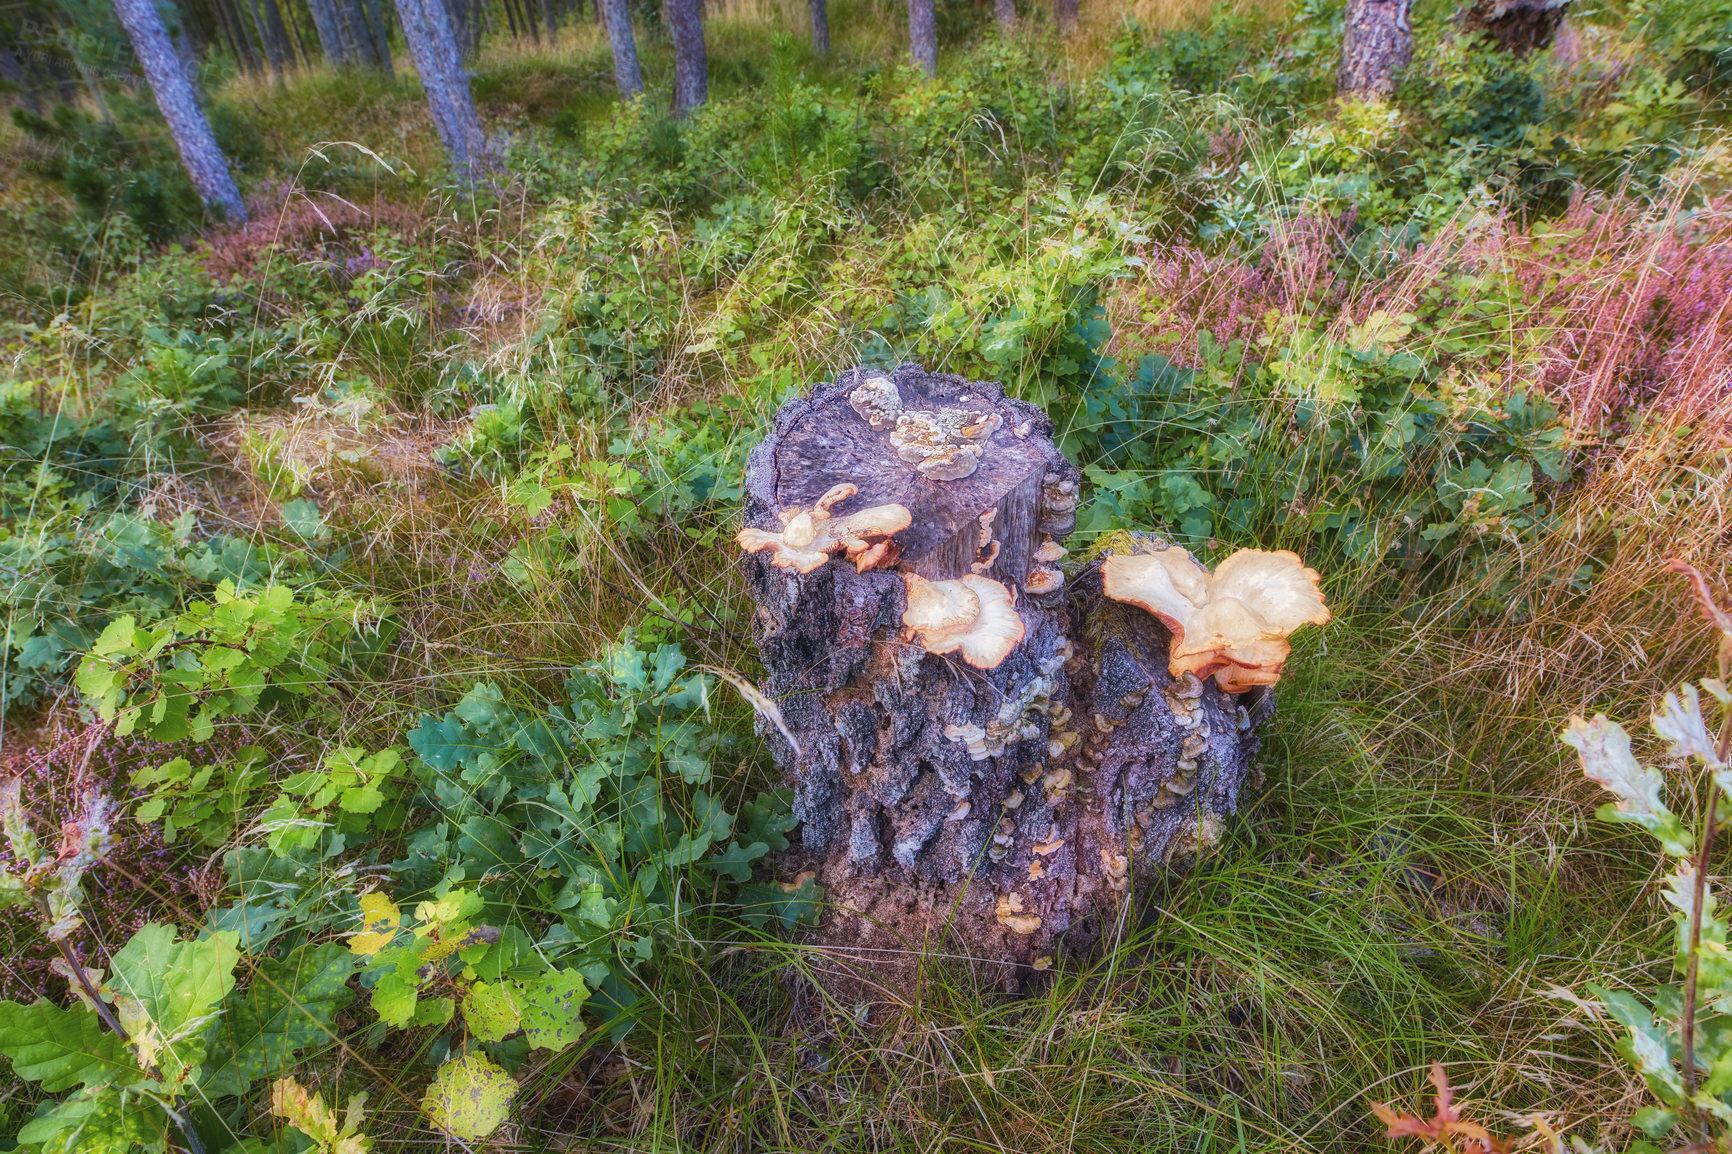 Buy stock photo Above view of wild mushrooms covering beech tree stump in remote forest, meadow, countryside. Damp fungal growth in deforested woods with lush grass in quiet, serene, tranquil, calm Norway landscape